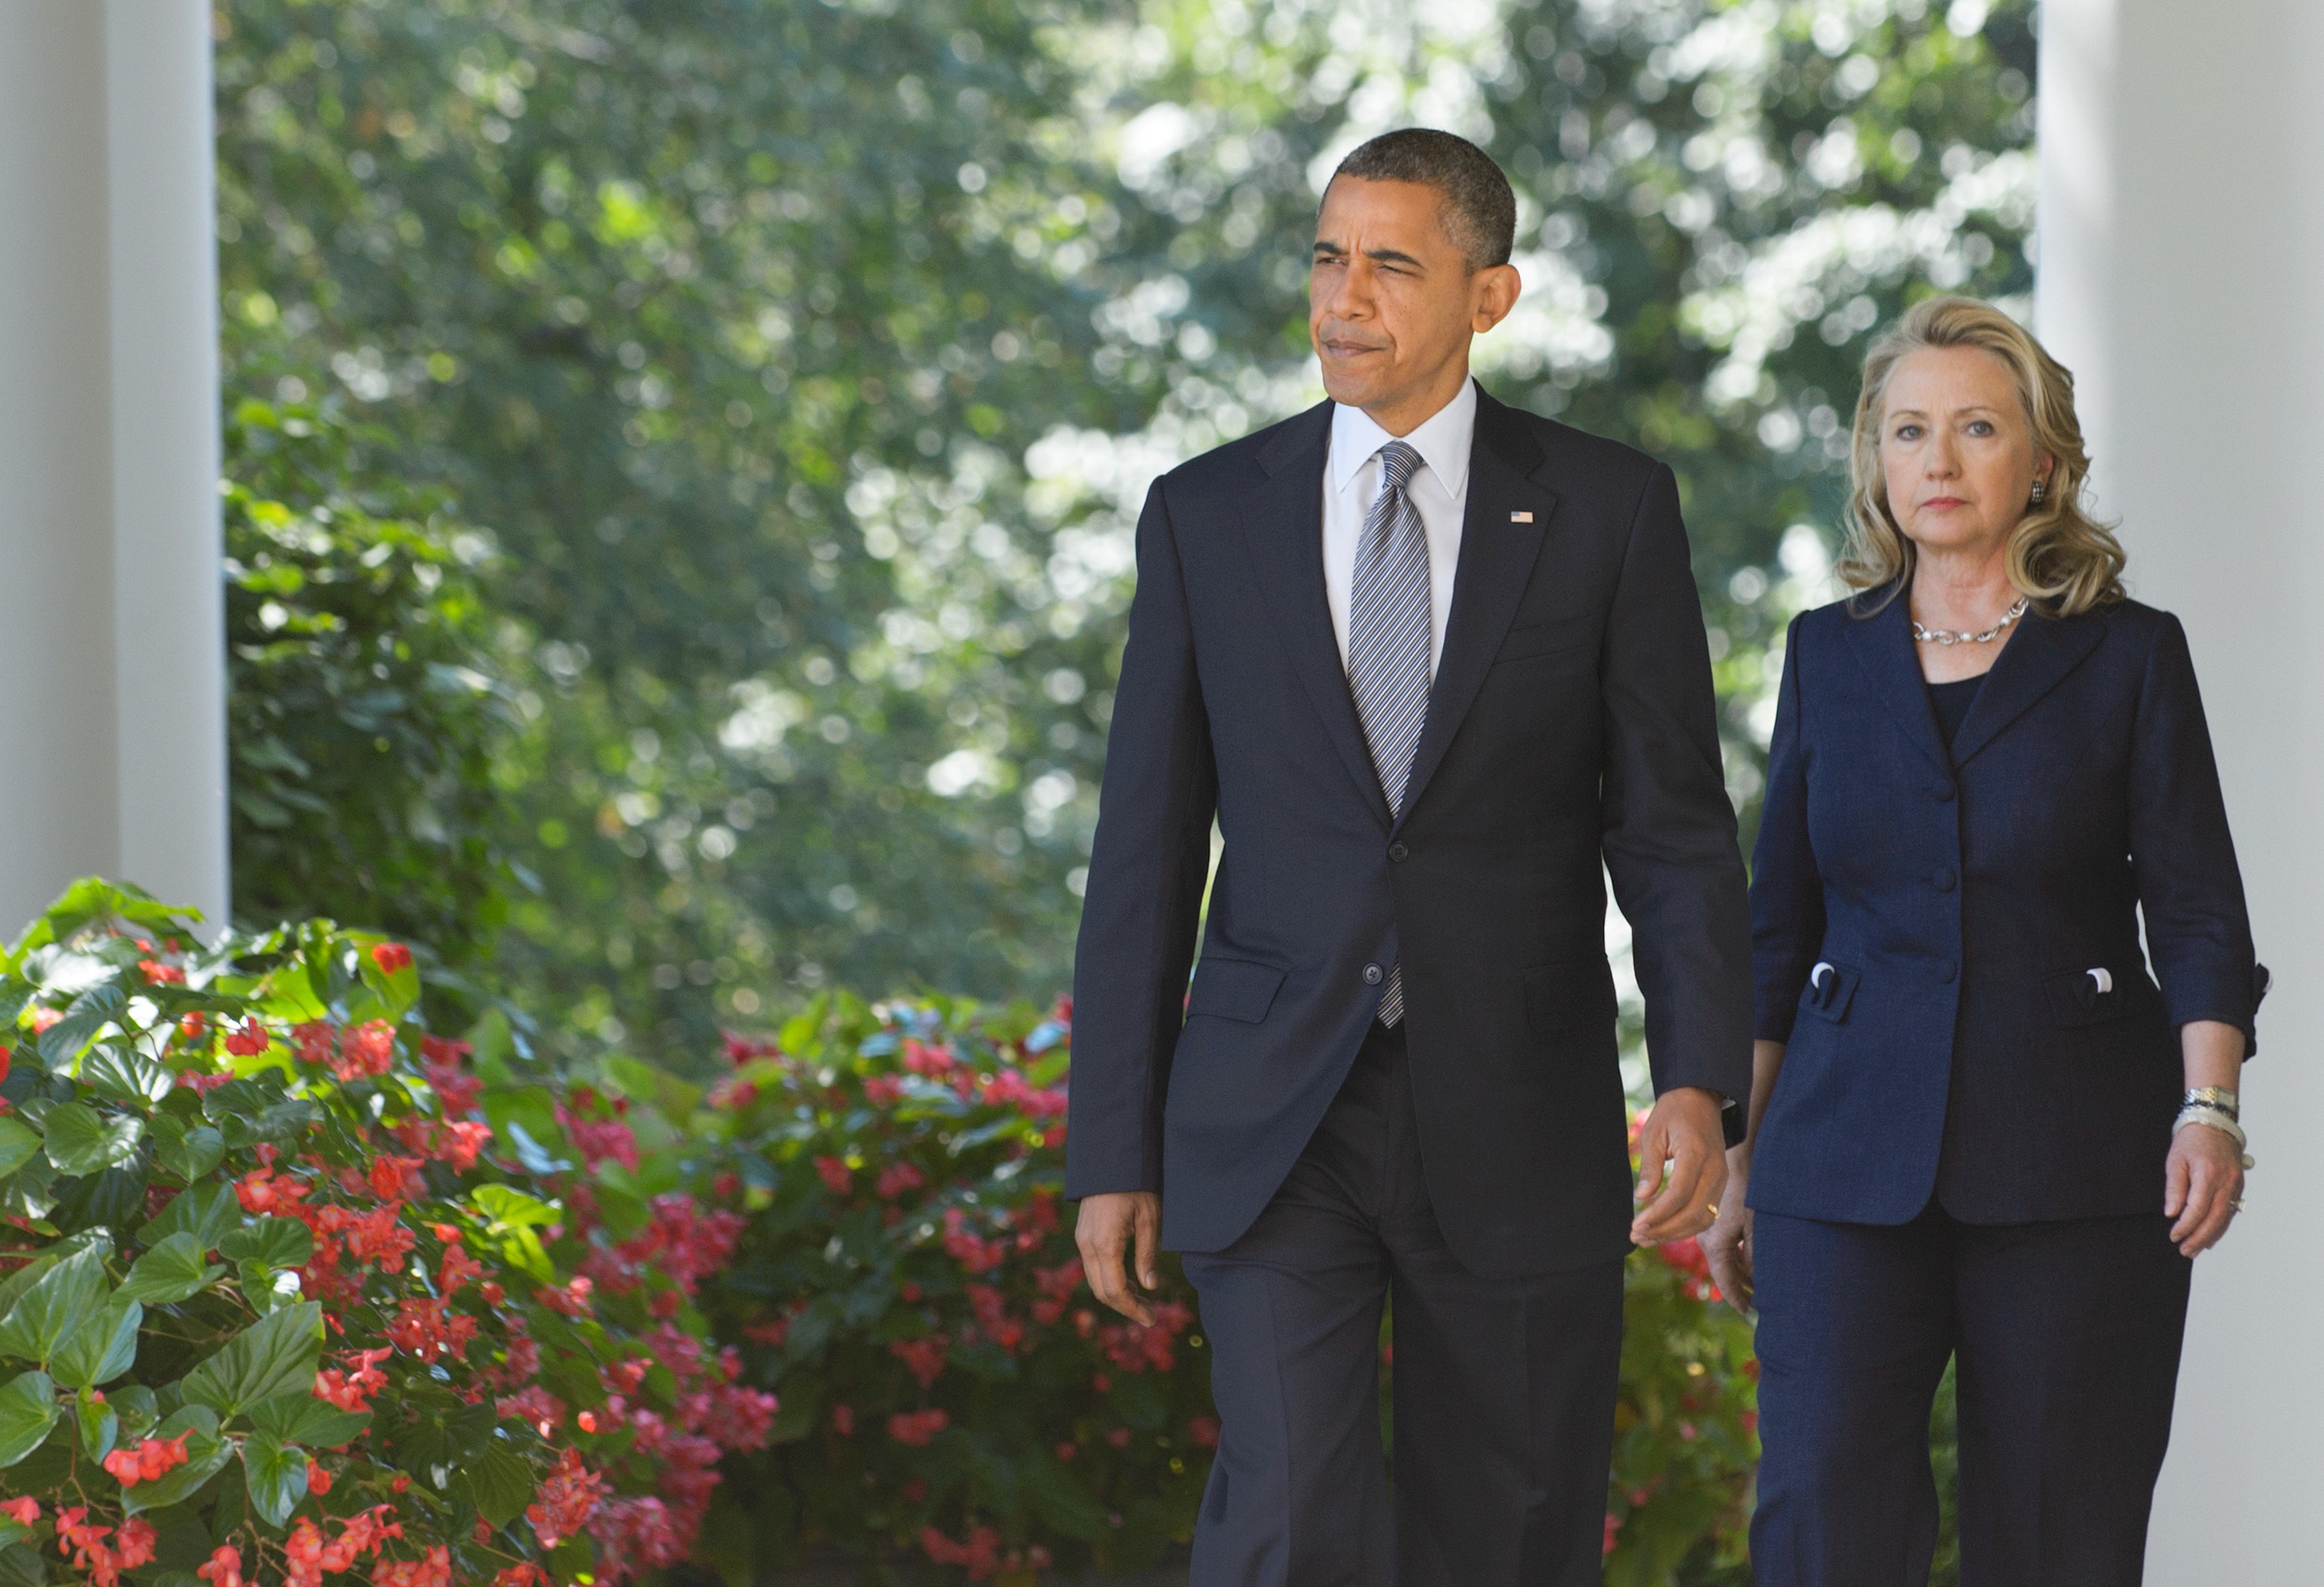 Image result for Secretary of State Hillary Clinton walks with President Barack Obama on Sept. 12, 2012